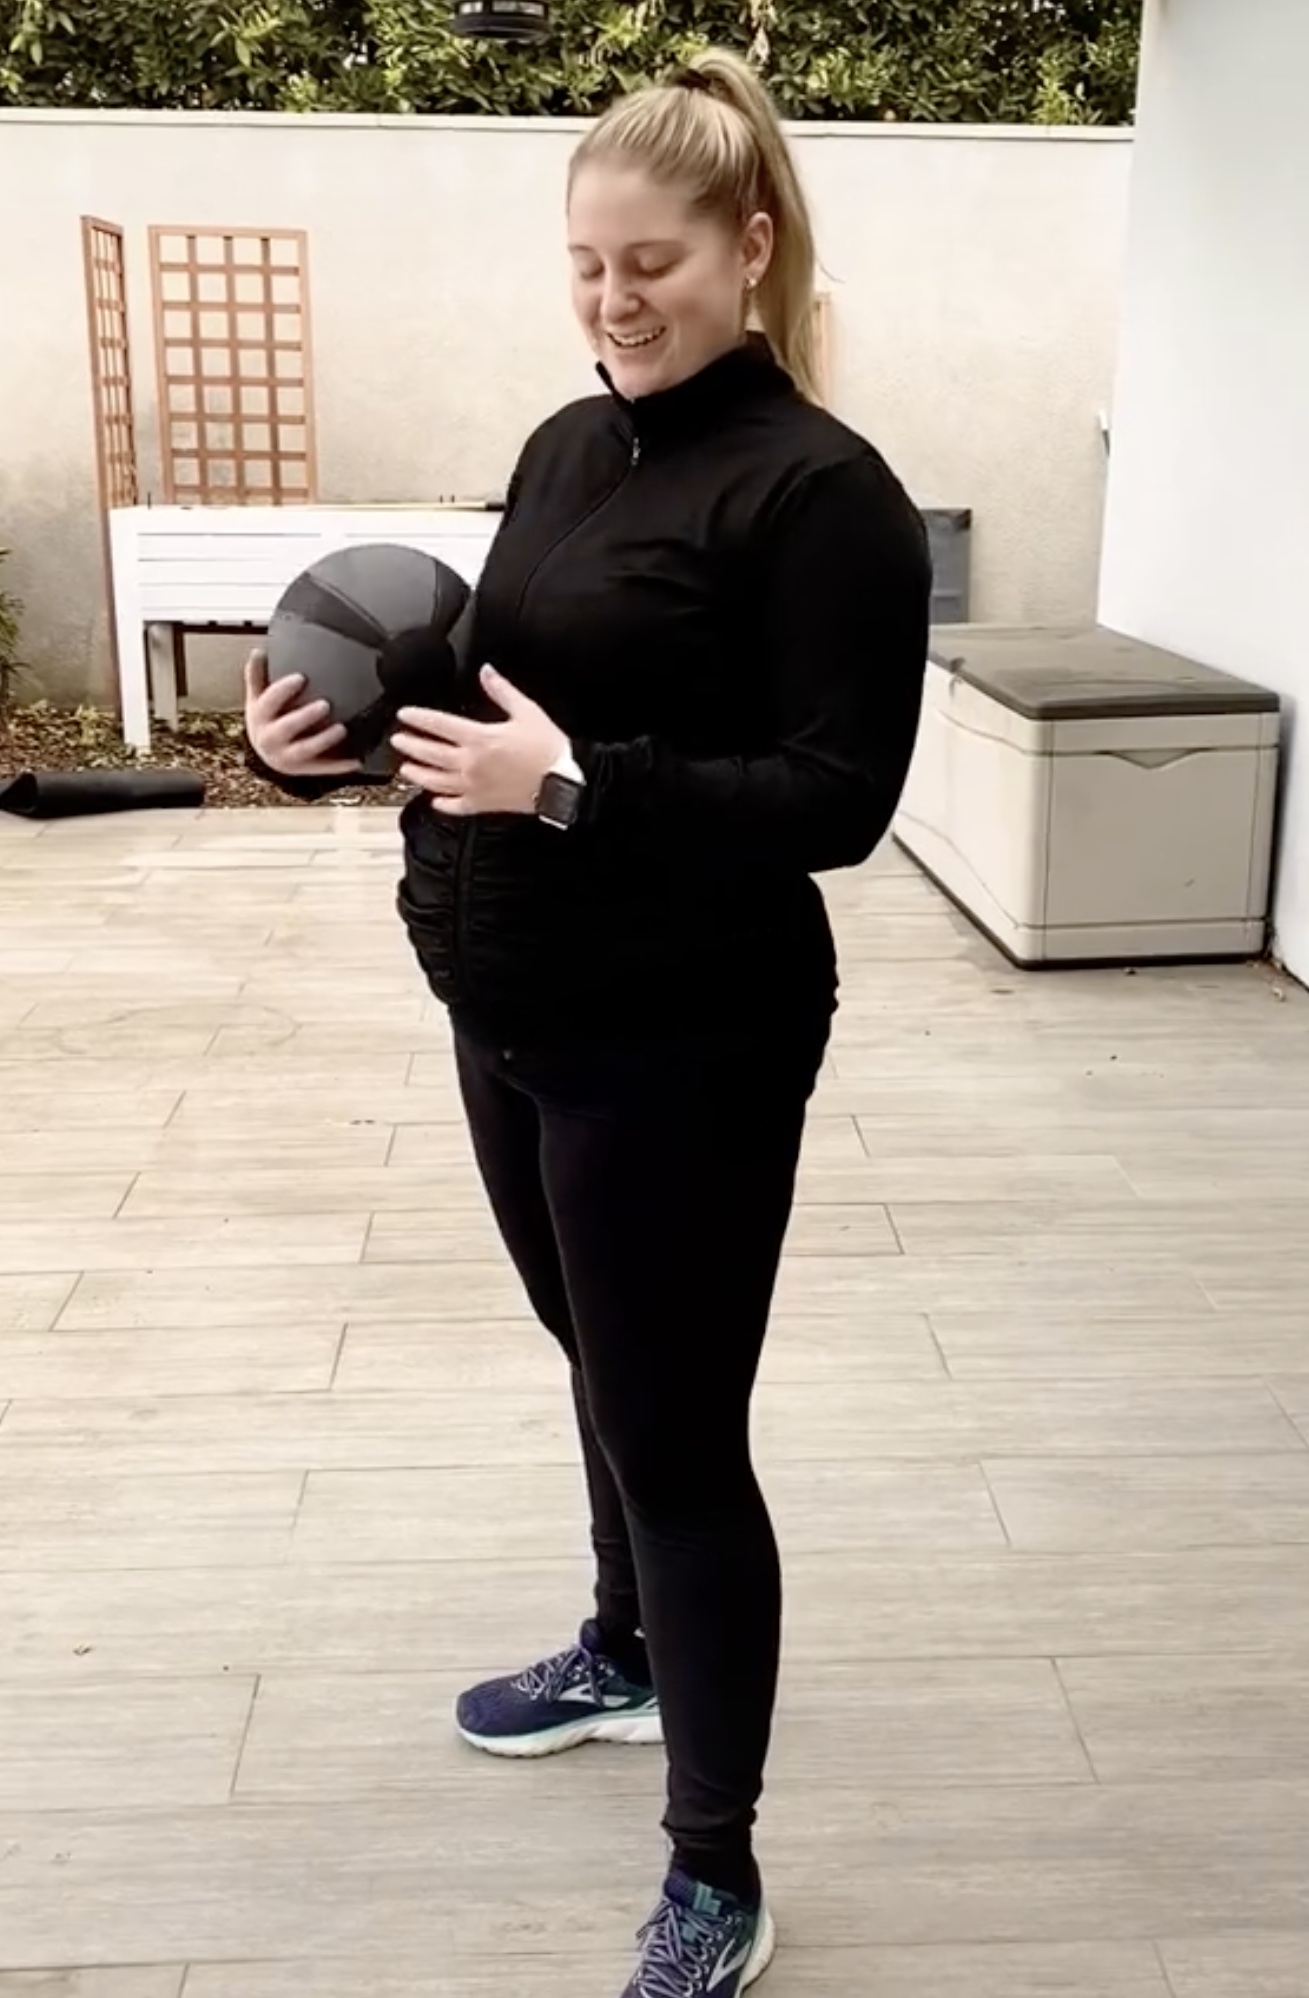 Meghan Trainor shows off baby bump in Gonna Know-inspired TikTok